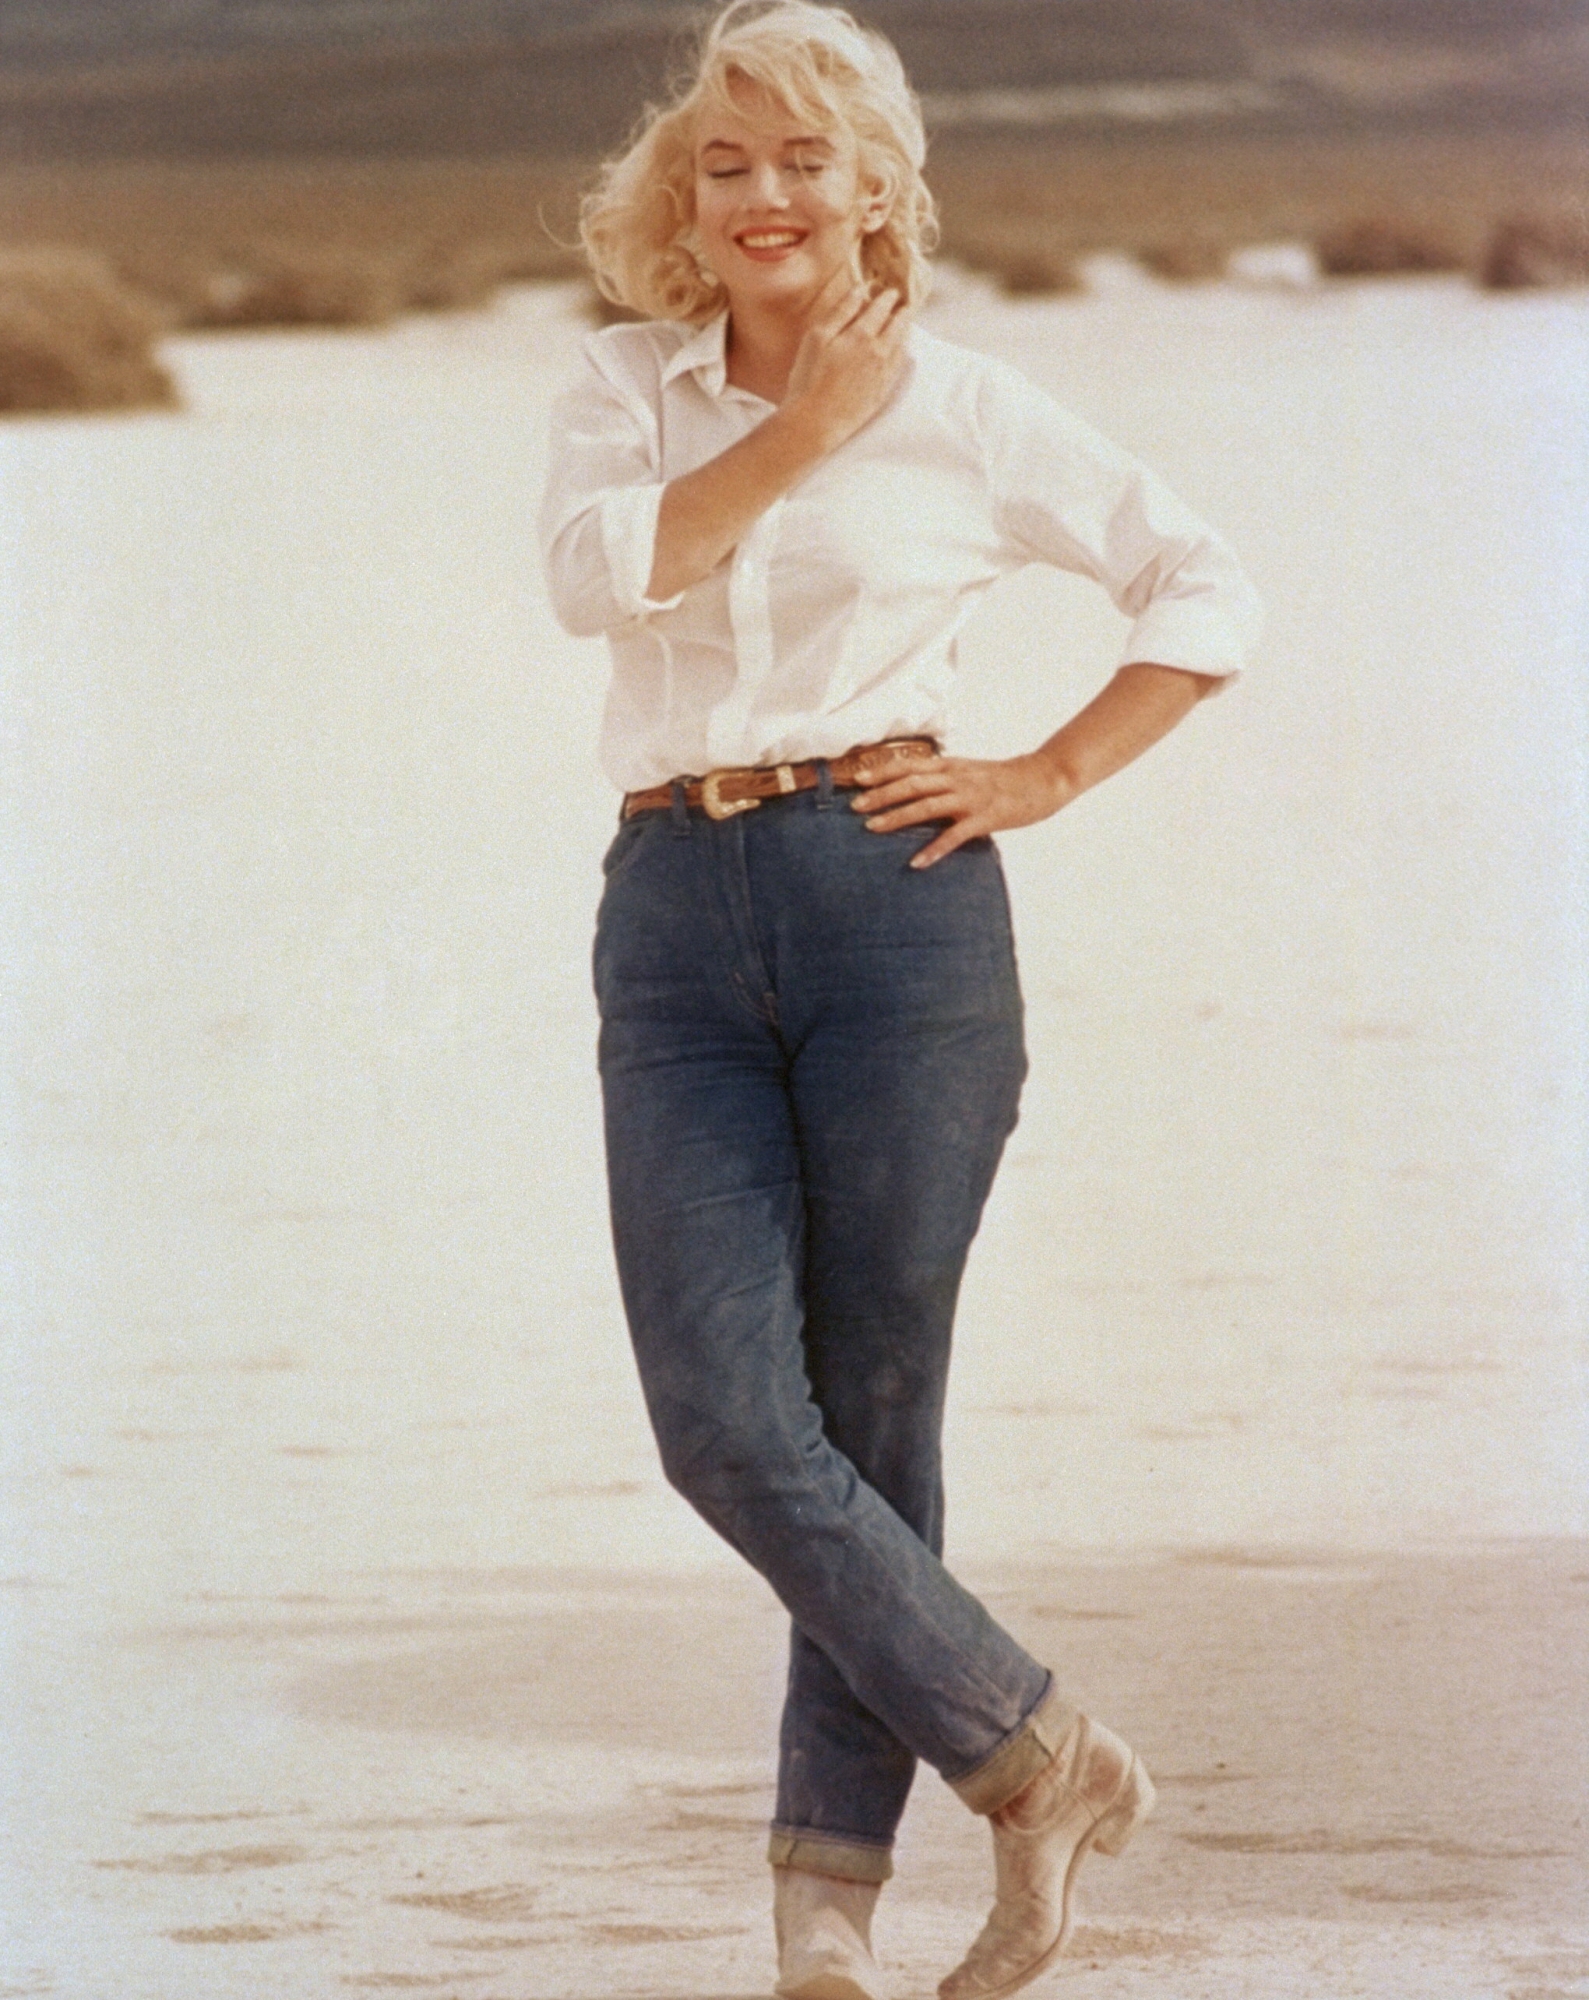 American actress, singer, model and sex symbol Marilyn Monroe on the set of The Misfits, directed by John Huston.  (Photo by Sunset Boulevard/Corbis via Getty Images)